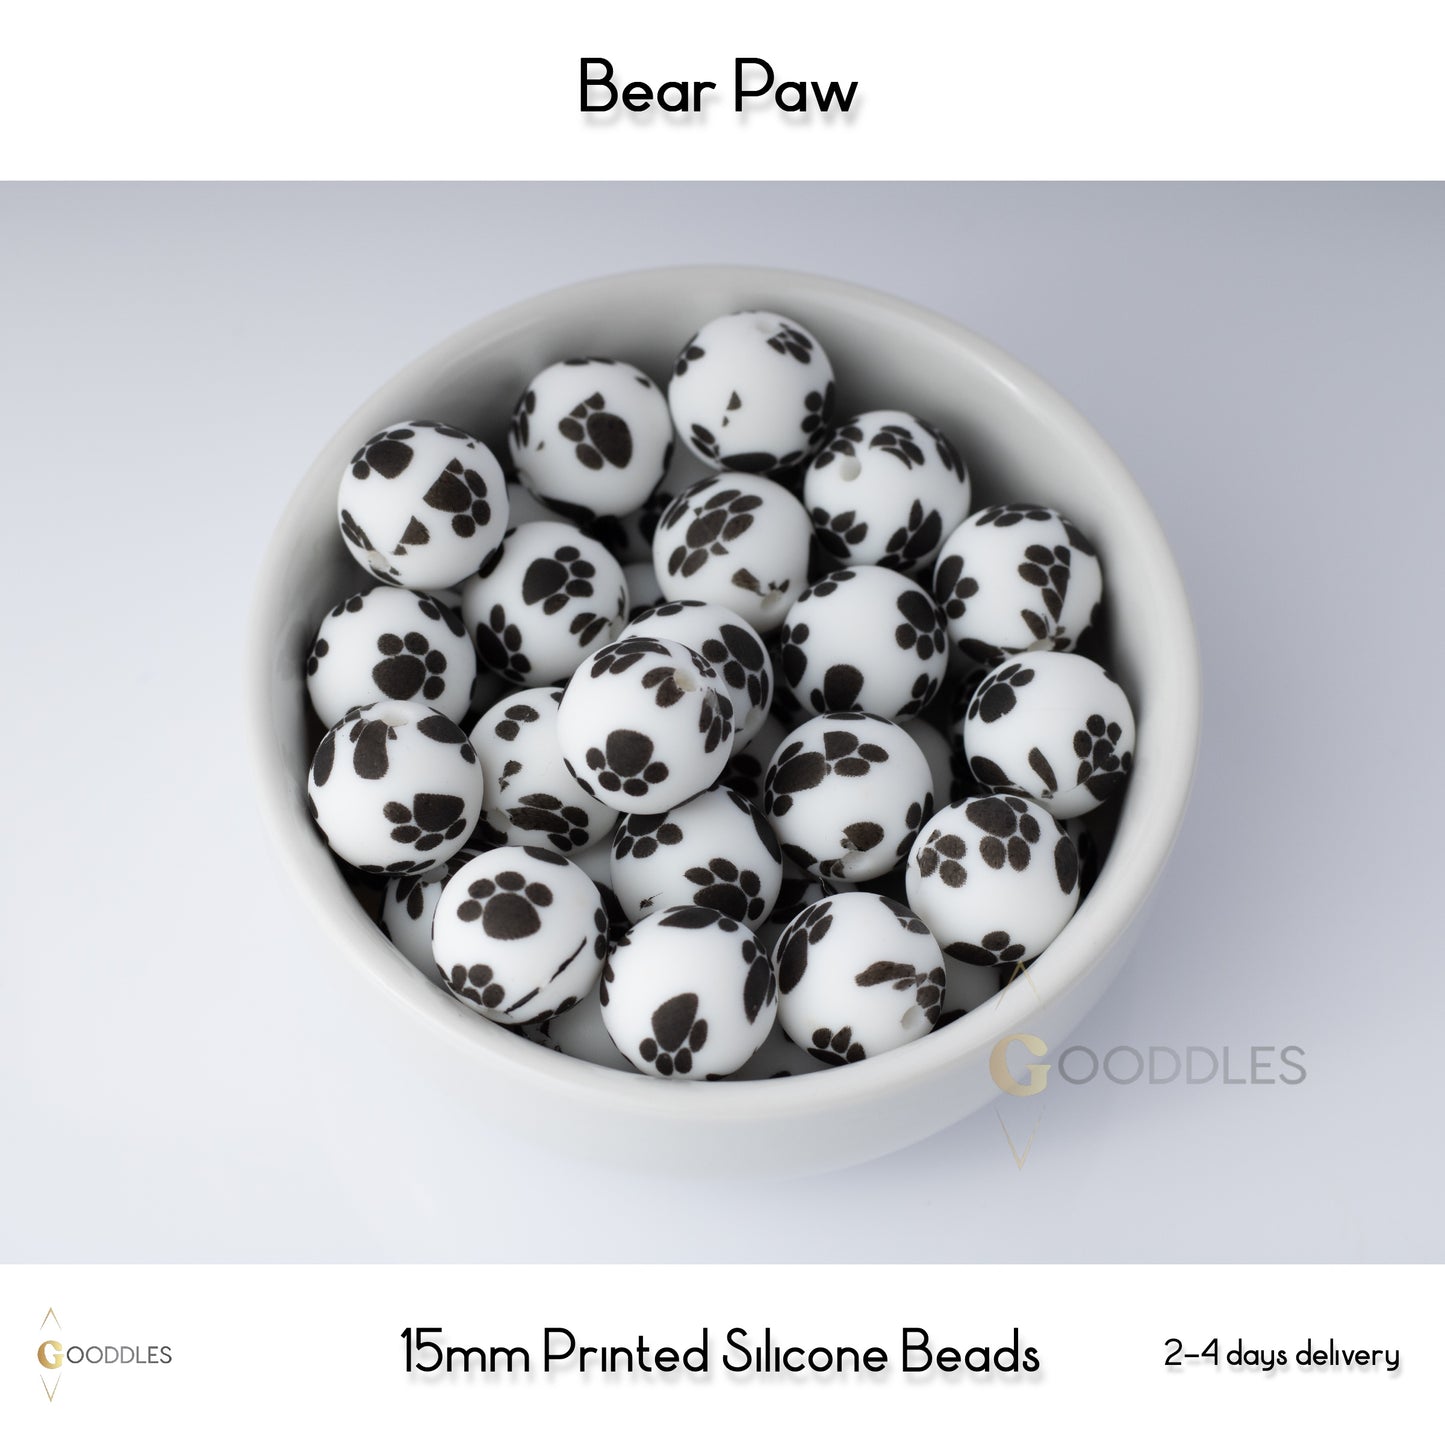 5pcs, Bear Paw Silicone Beads Printed Round Silicone Beads